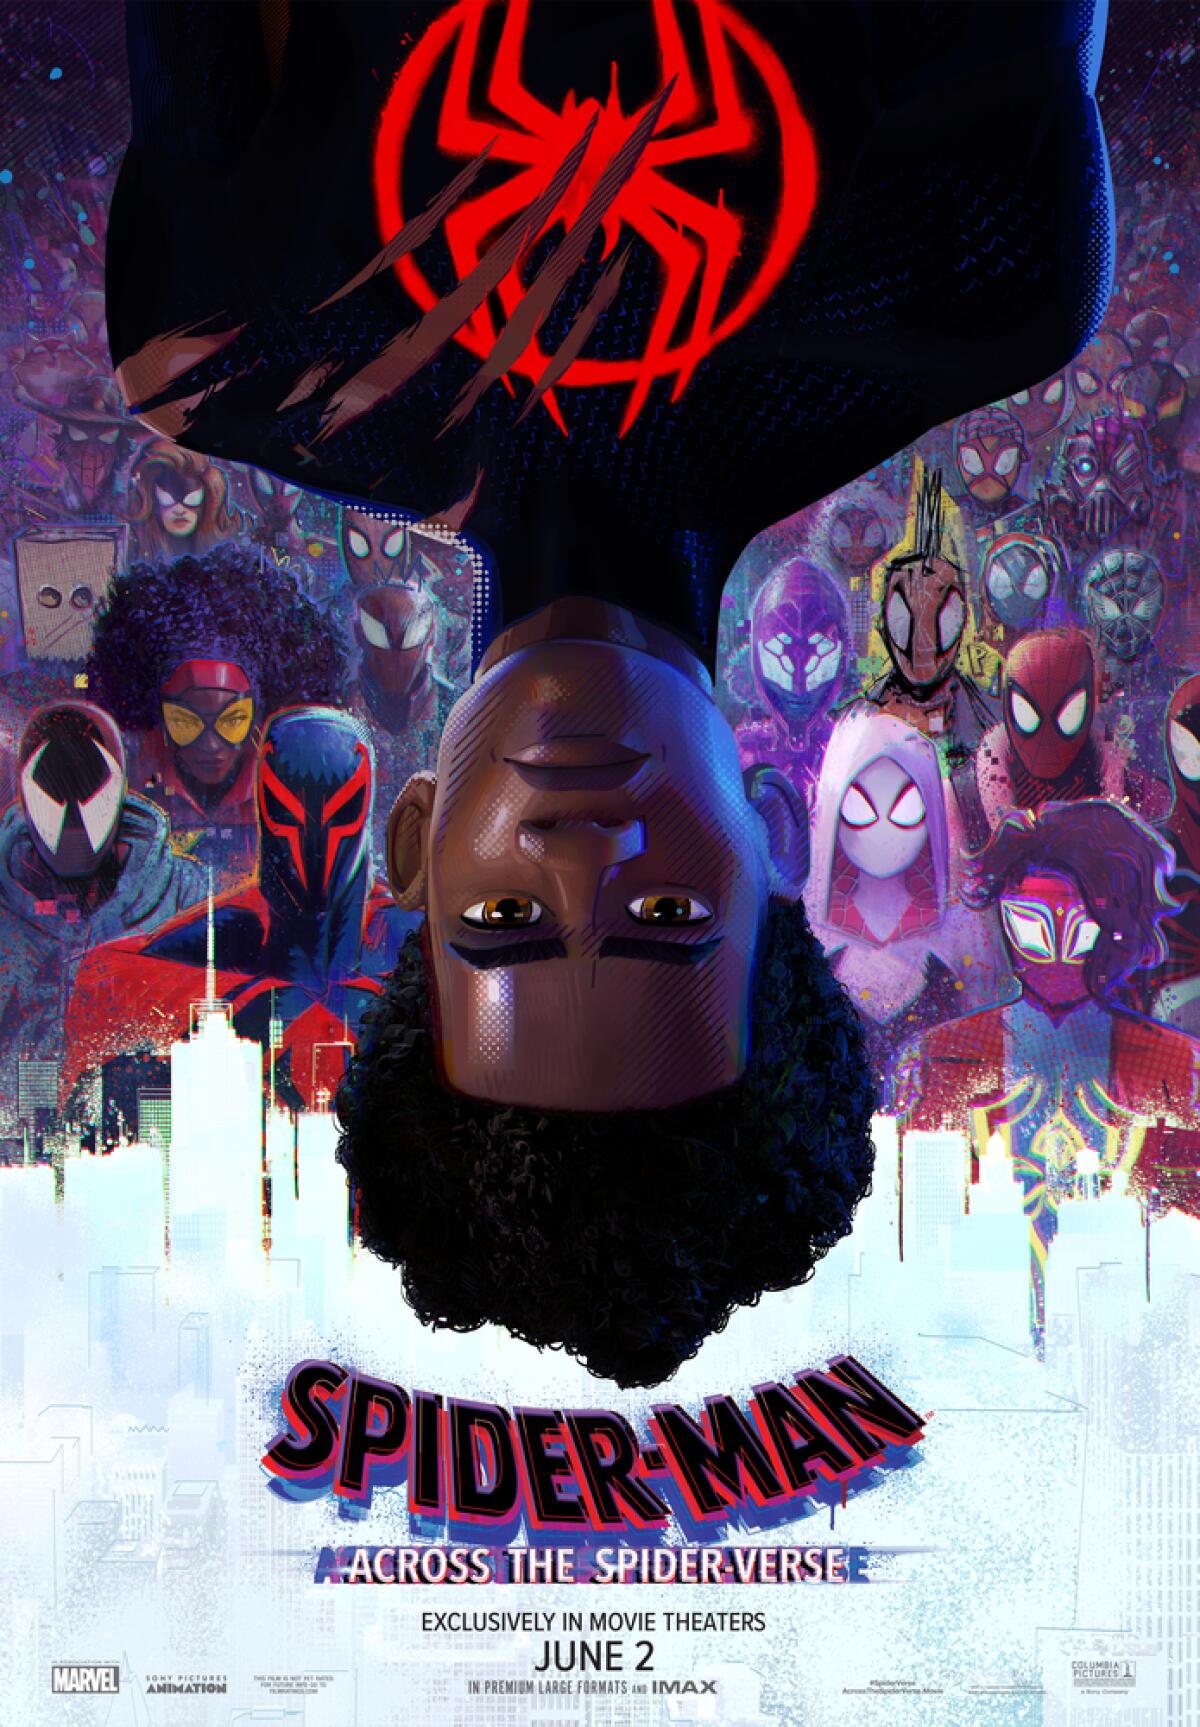 Sony Releases New Spider-Man Poster for 4 Main Spider-Men